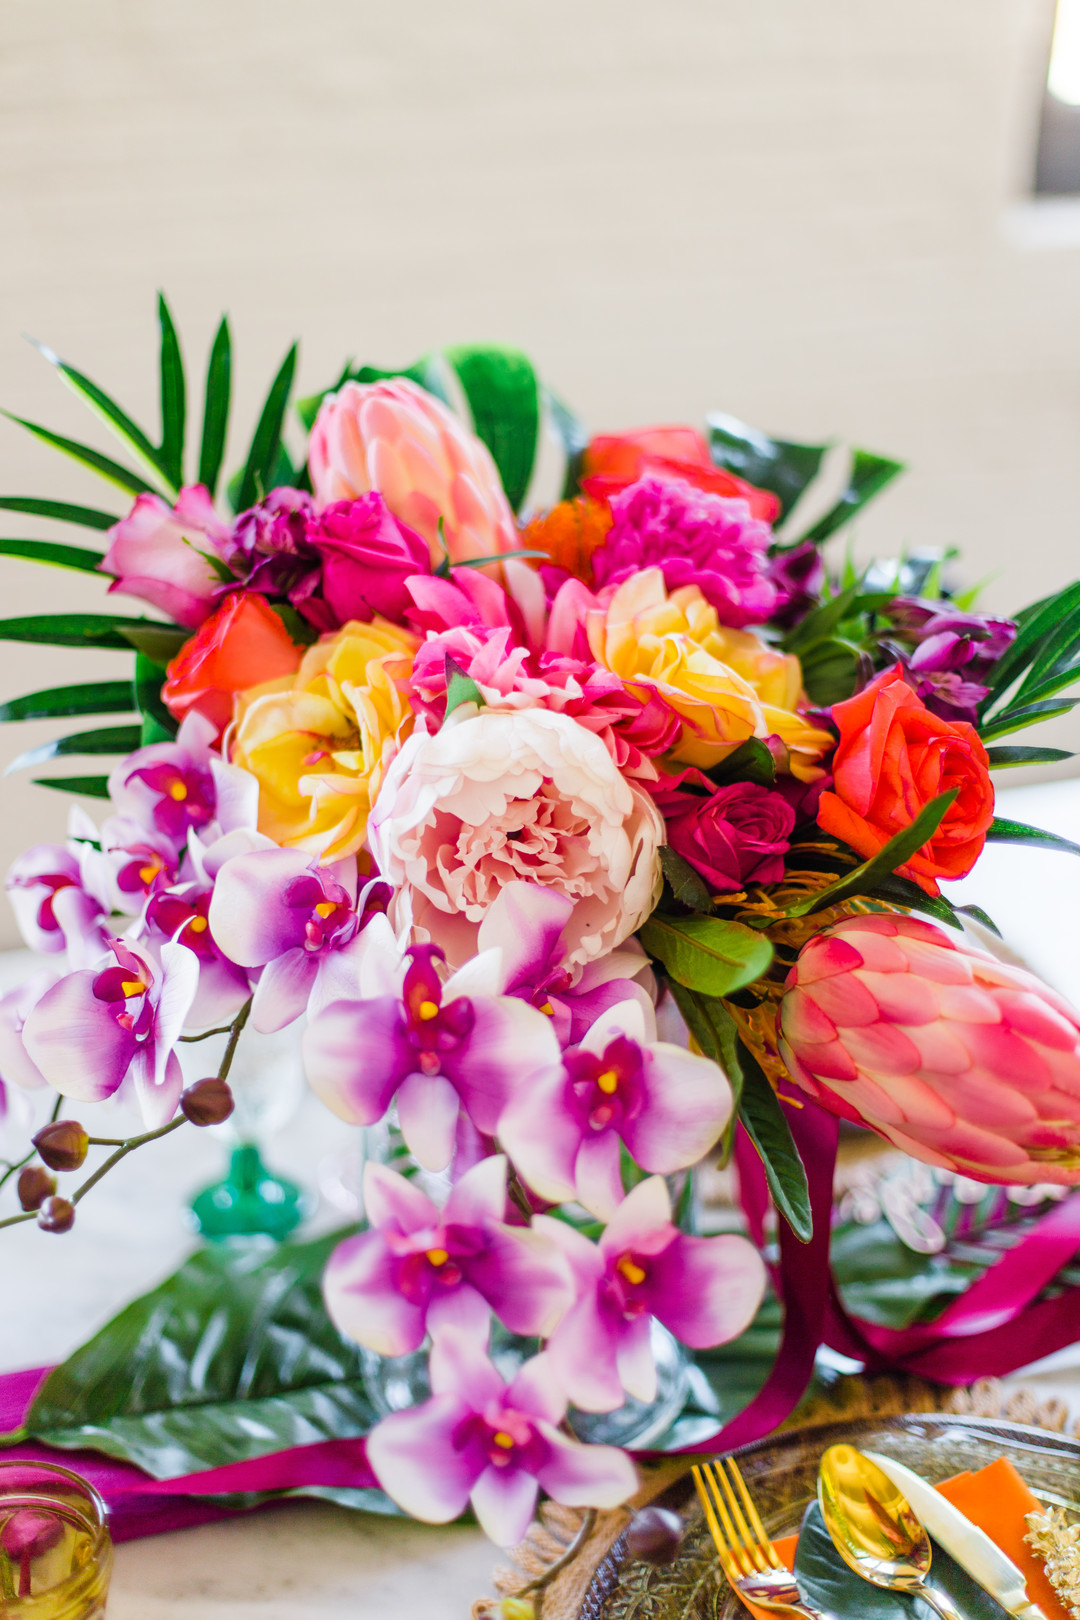 Bright and tropical wedding centerpieces: Tropical Eclectic Wedding Inspiration captured by Grace Rios Photography featured on CHI thee WED. See more colorful wedding ideas at CHItheeWED.com!